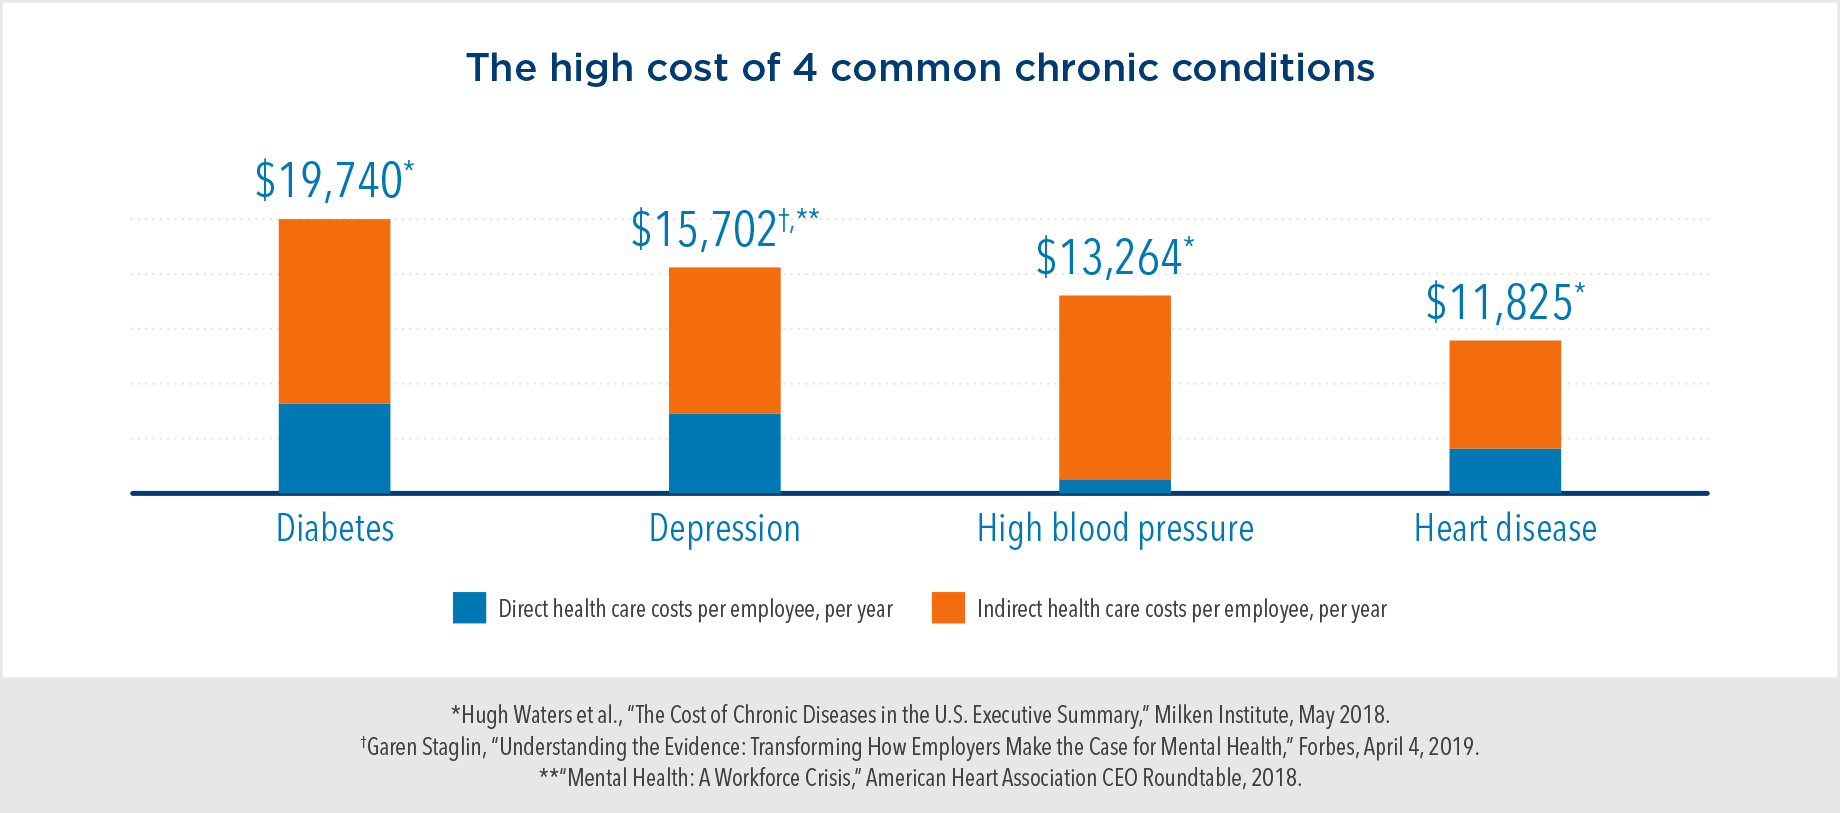 The high cost of 4 common chronic conditions. When combining direct and indirect health care costs per employee, per year, diabetes costs $19,740; depression costs $15,702; high blood pressure costs $13,264; and heart disease costs $11,825.